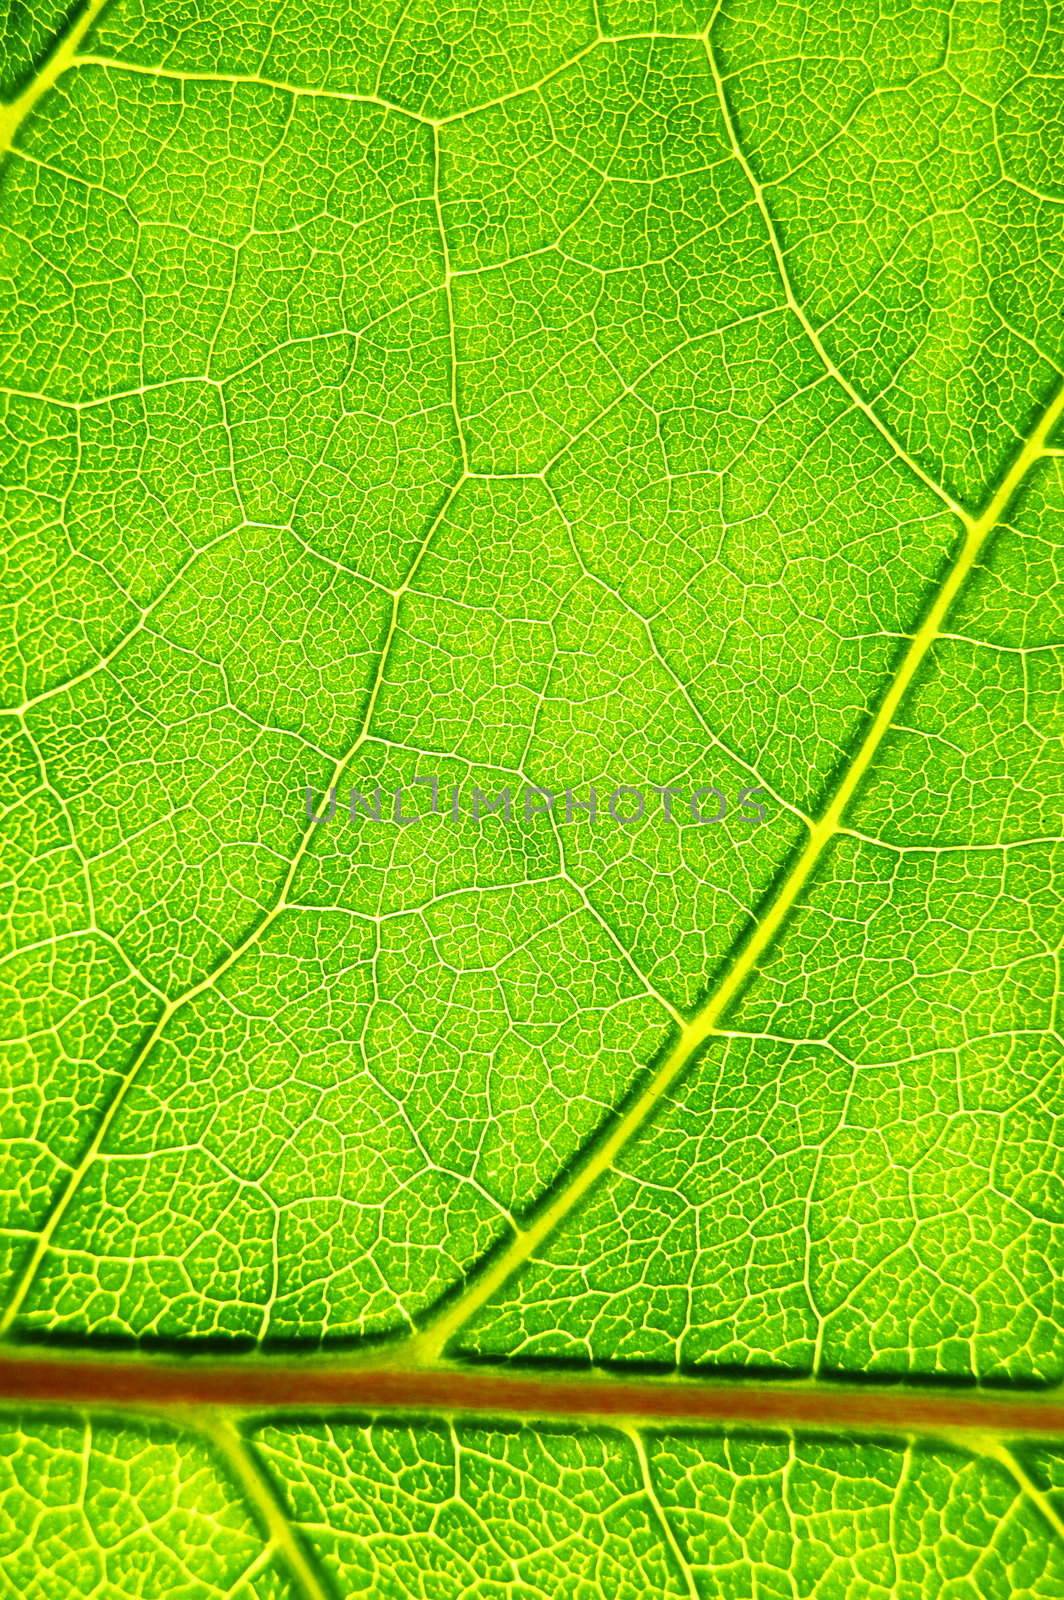 structure texture and pattern of green leaf